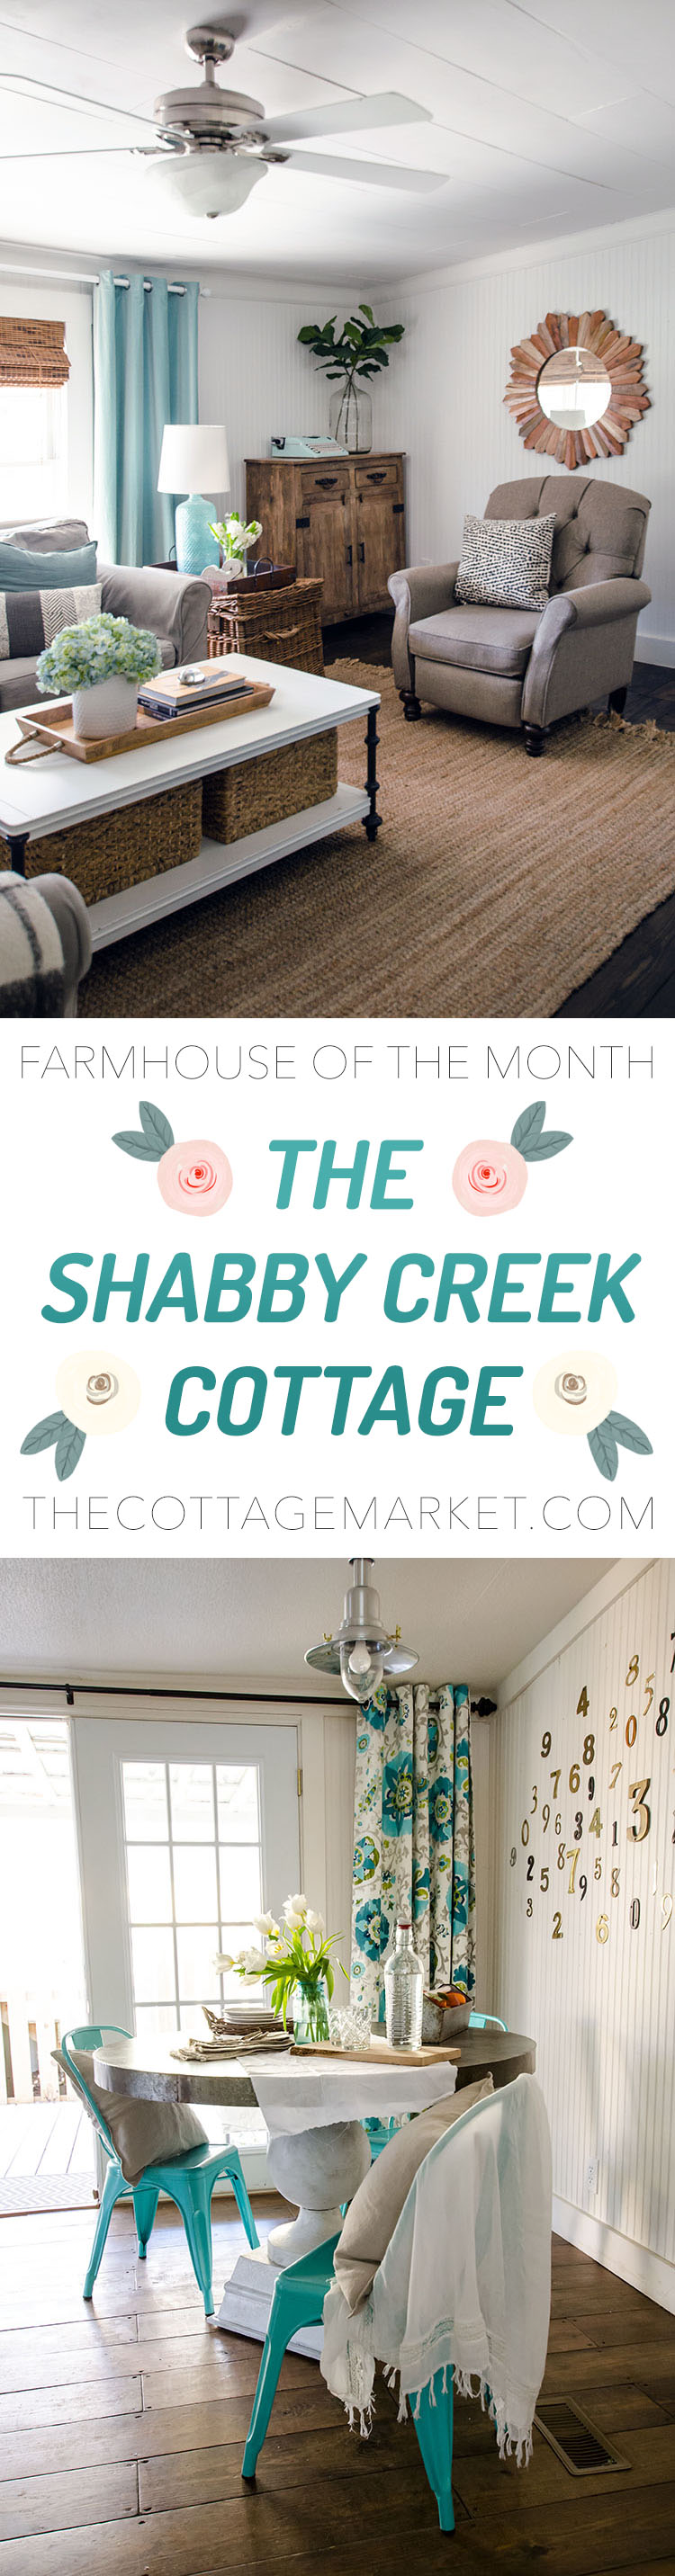 A Look Inside the Shabby Creek Cottage